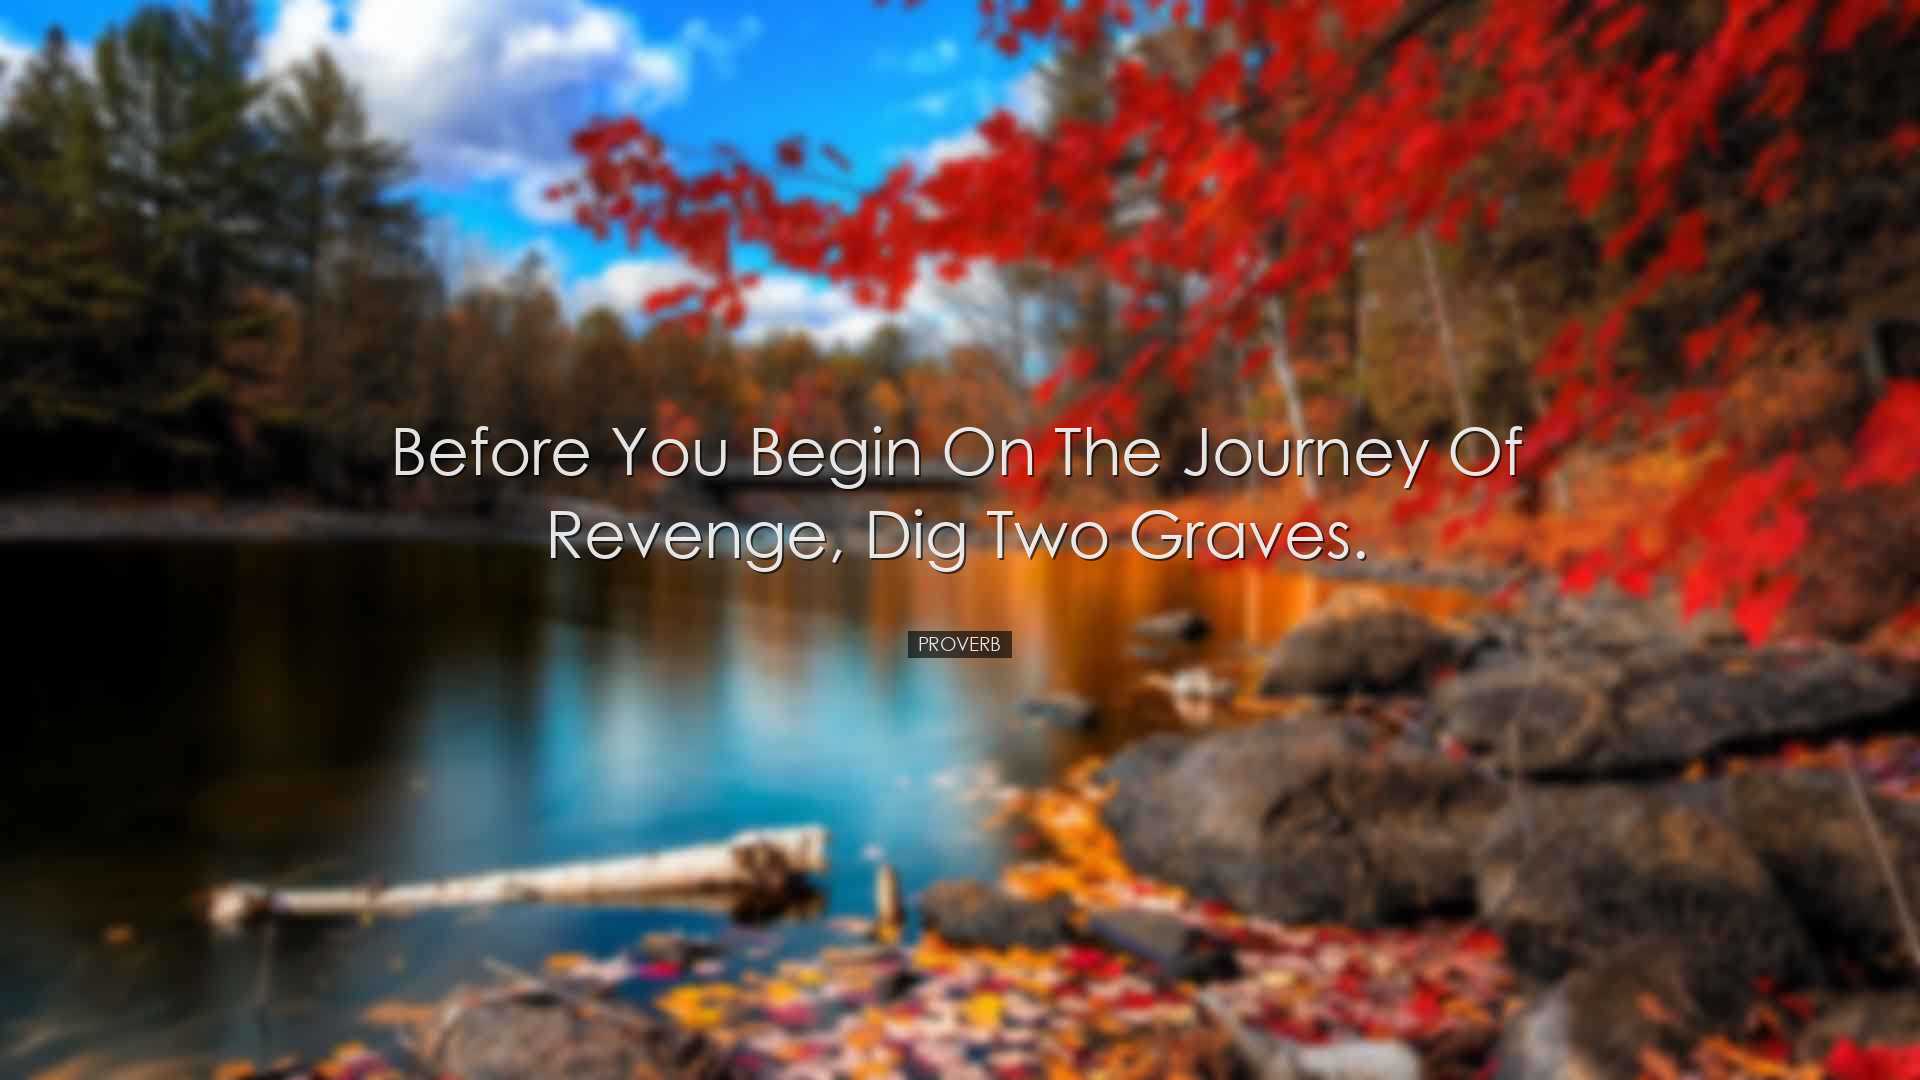 Before you begin on the journey of revenge, dig two graves. - Prov